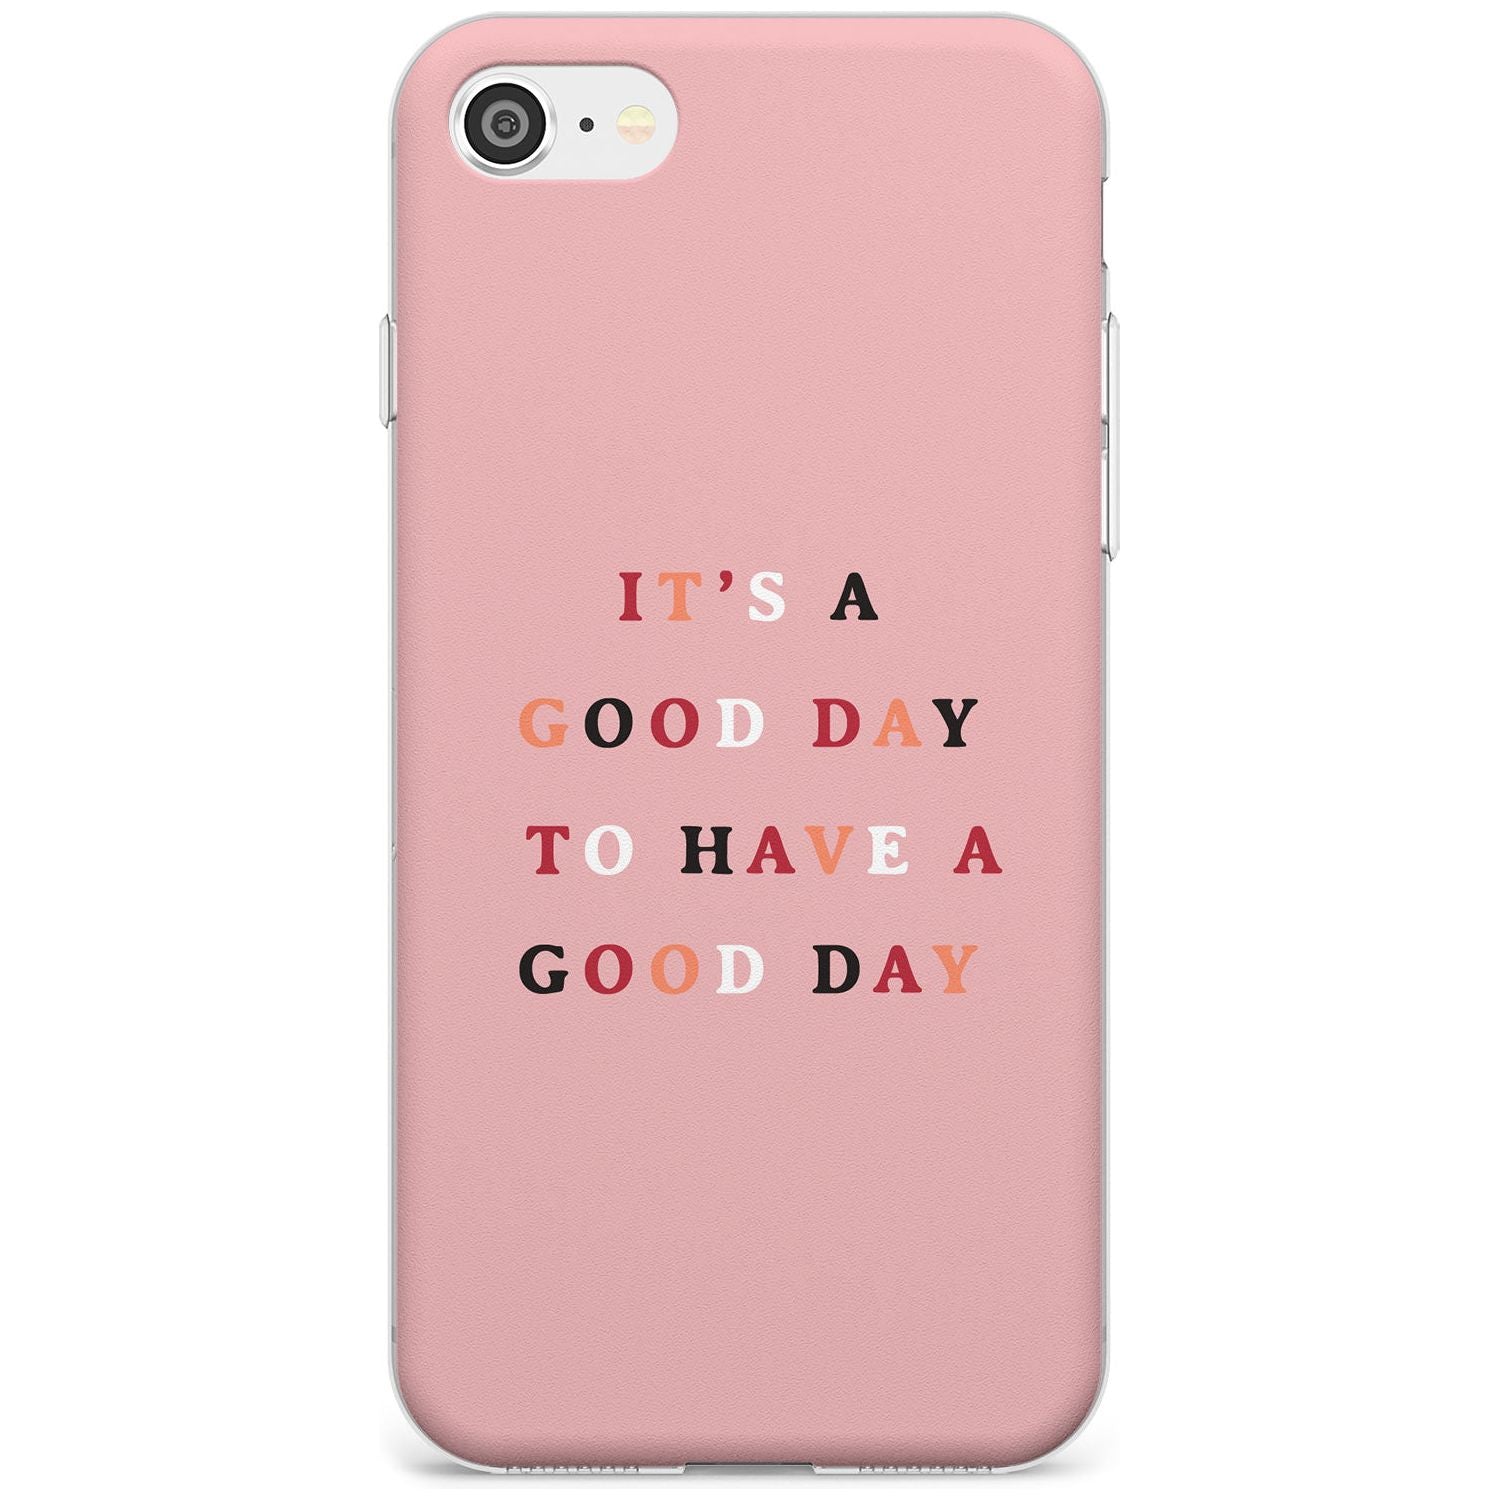 It's a good day to have a good day Slim TPU Phone Case for iPhone SE 8 7 Plus